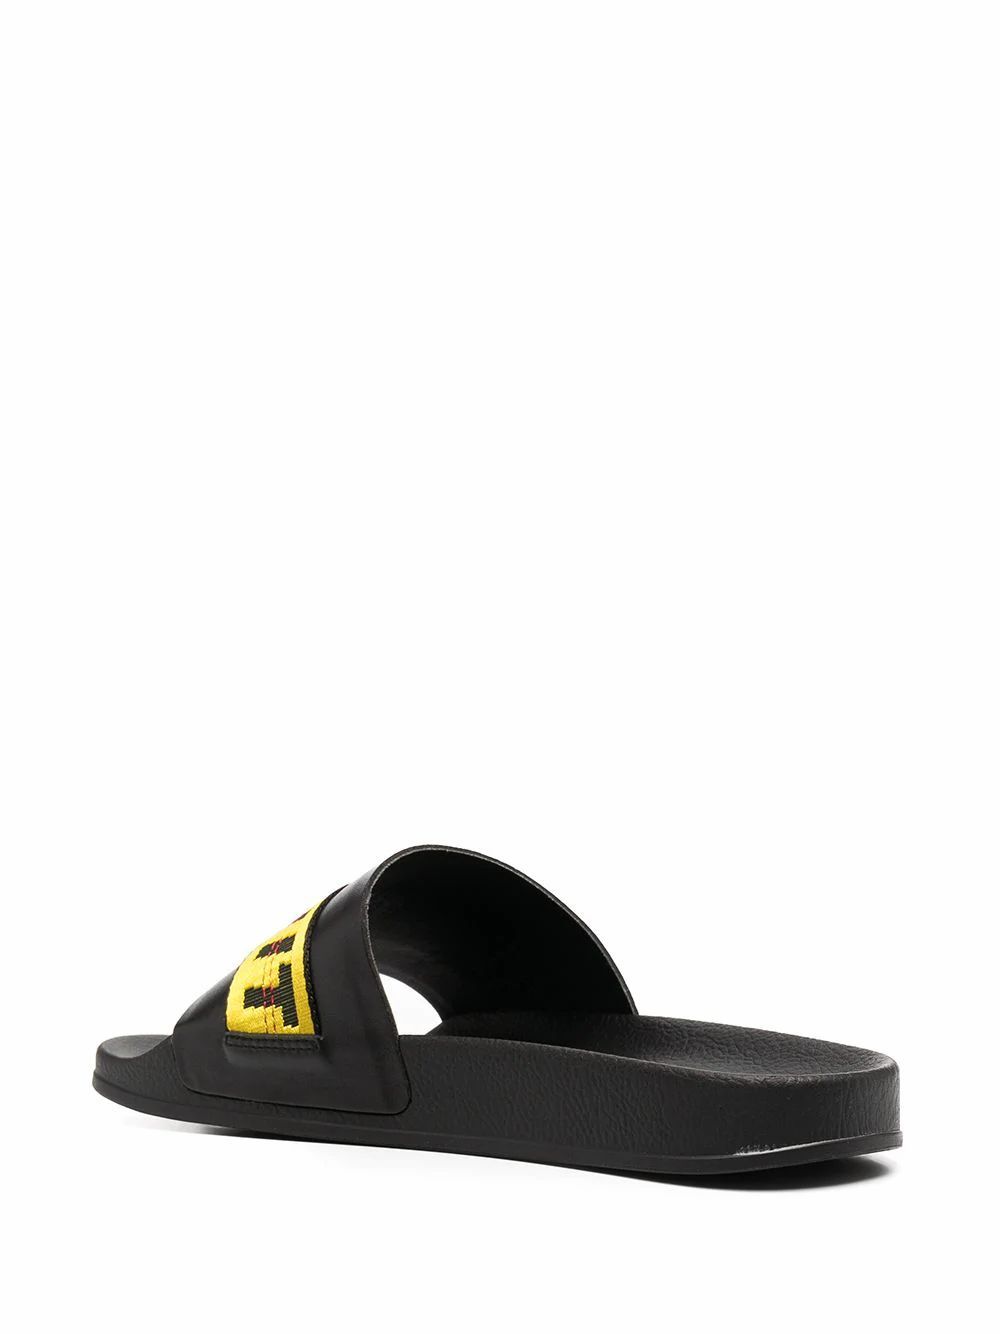 SANDALS OFF-WHITE, POLYURETHANE 100%, color BLACK, Rubber sole, SS21, product code OMIC001R21MAT0021018